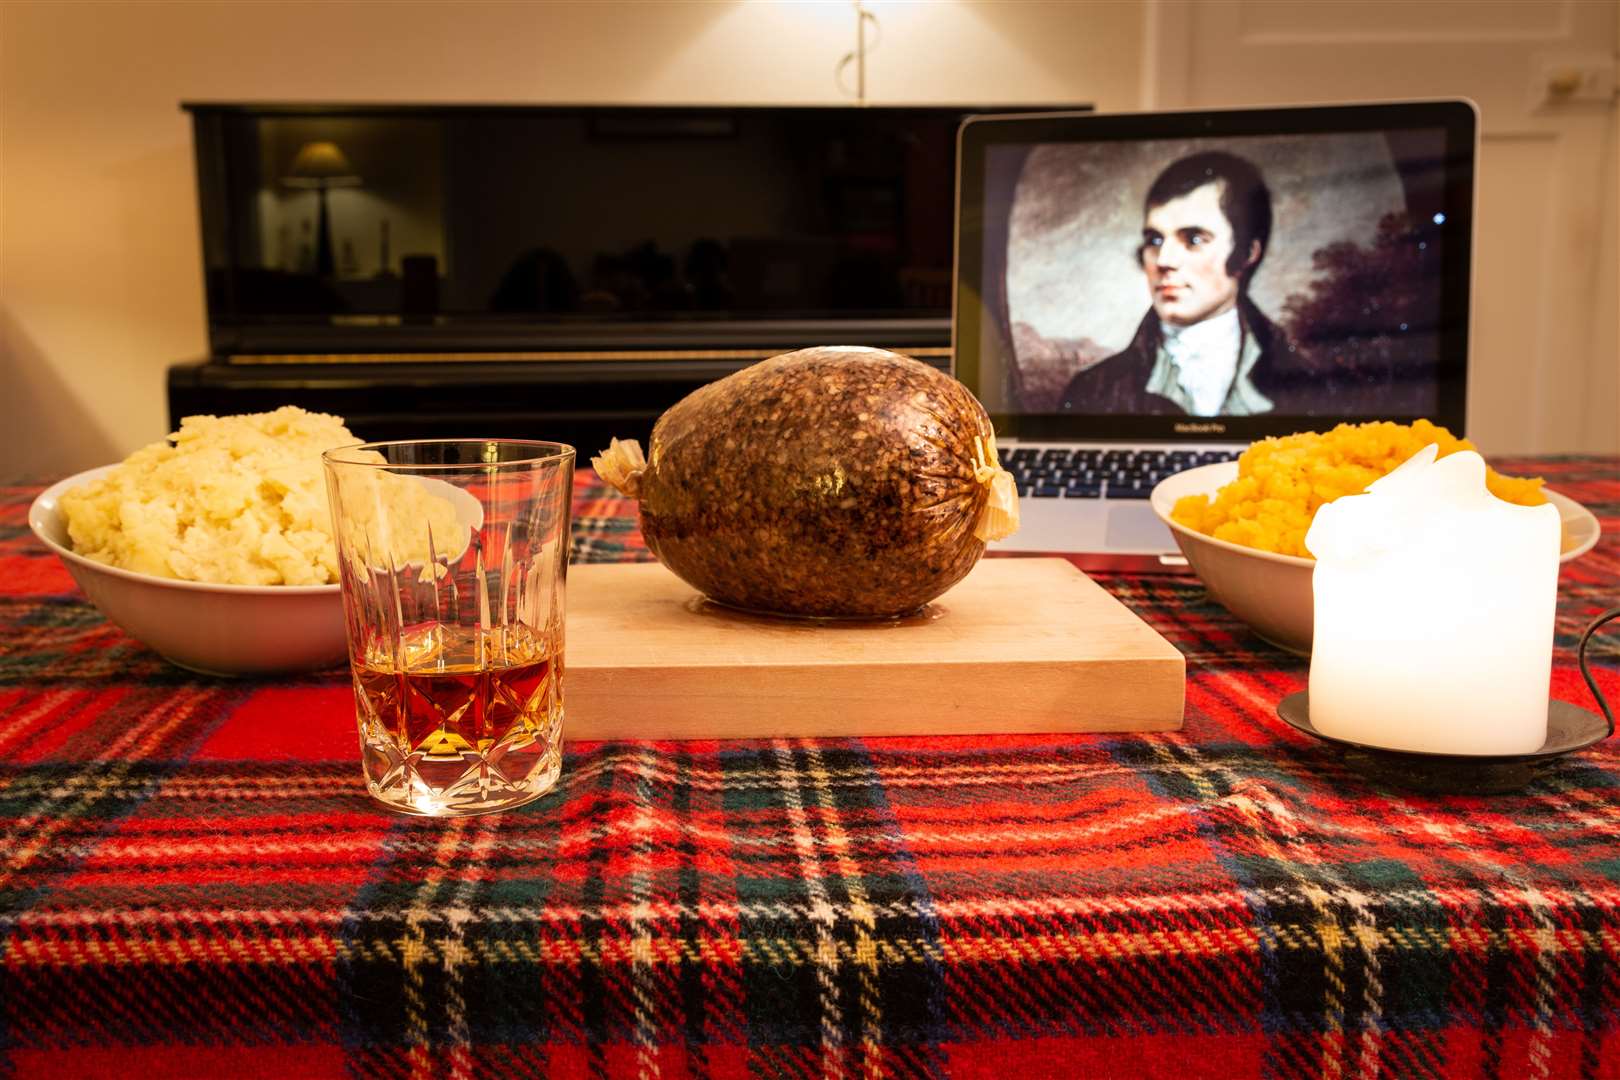 Across the country people will be celebrating Burns Night.